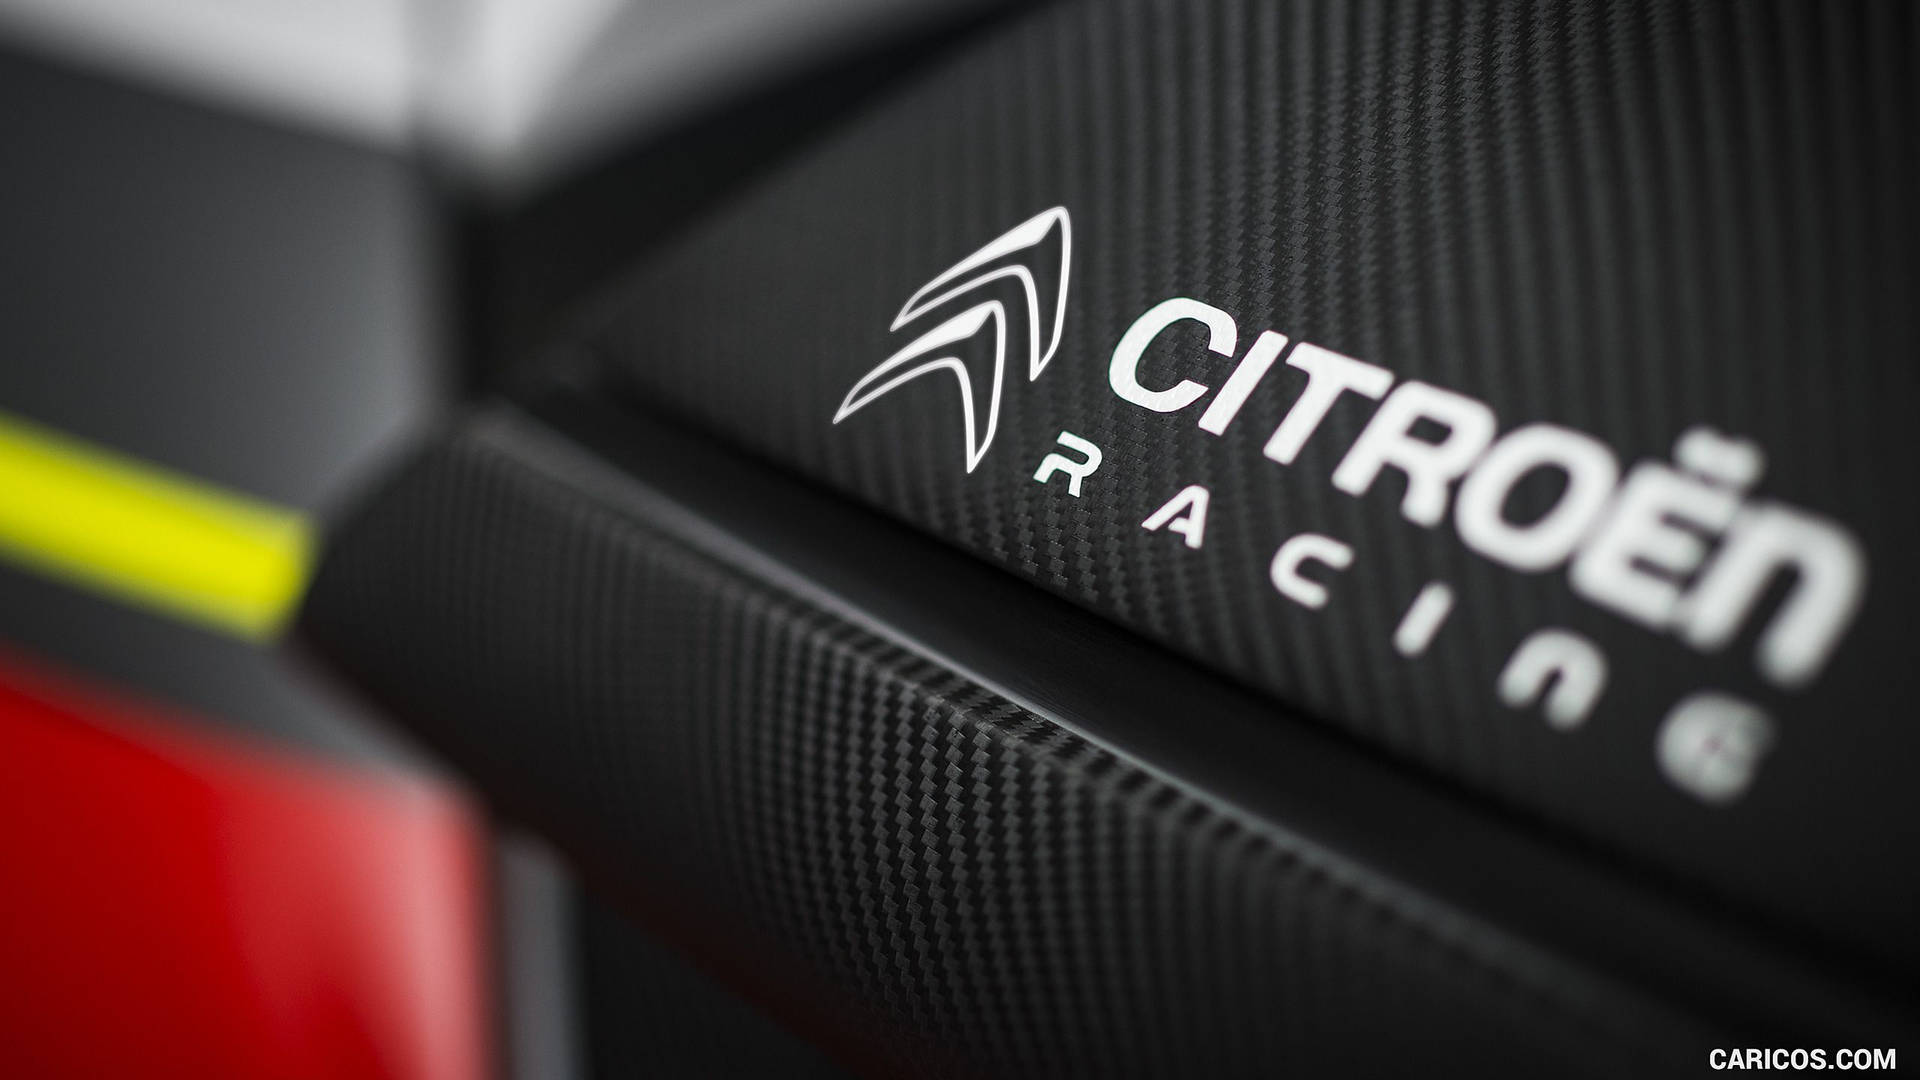 Citroën Racing Logo - The Bold Emblem for Speed and Performance Wallpaper